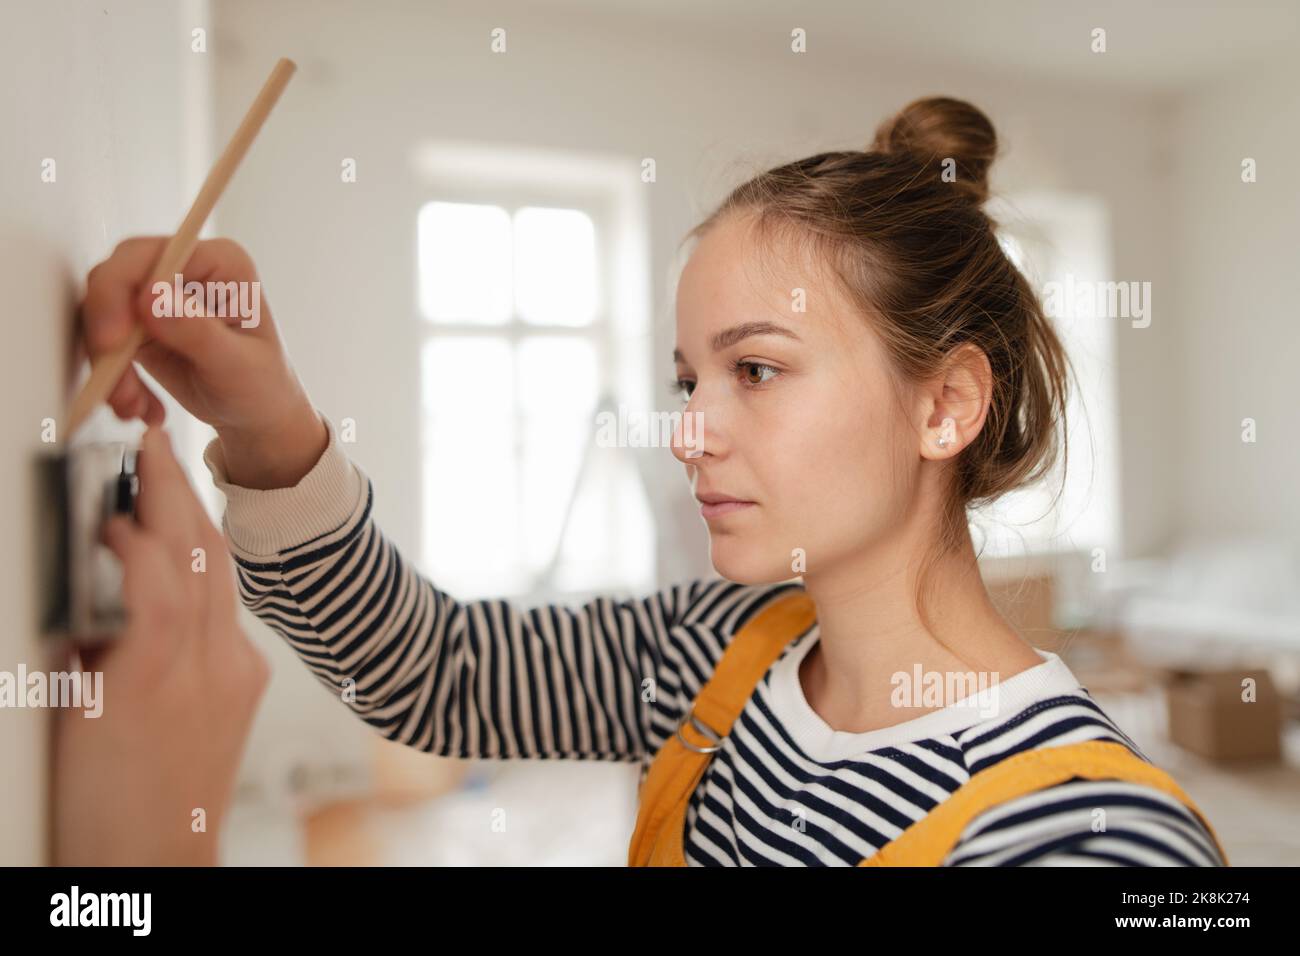 Young woman remaking her apartment, measuring wall with spirit level and hanging shelf. Stock Photo